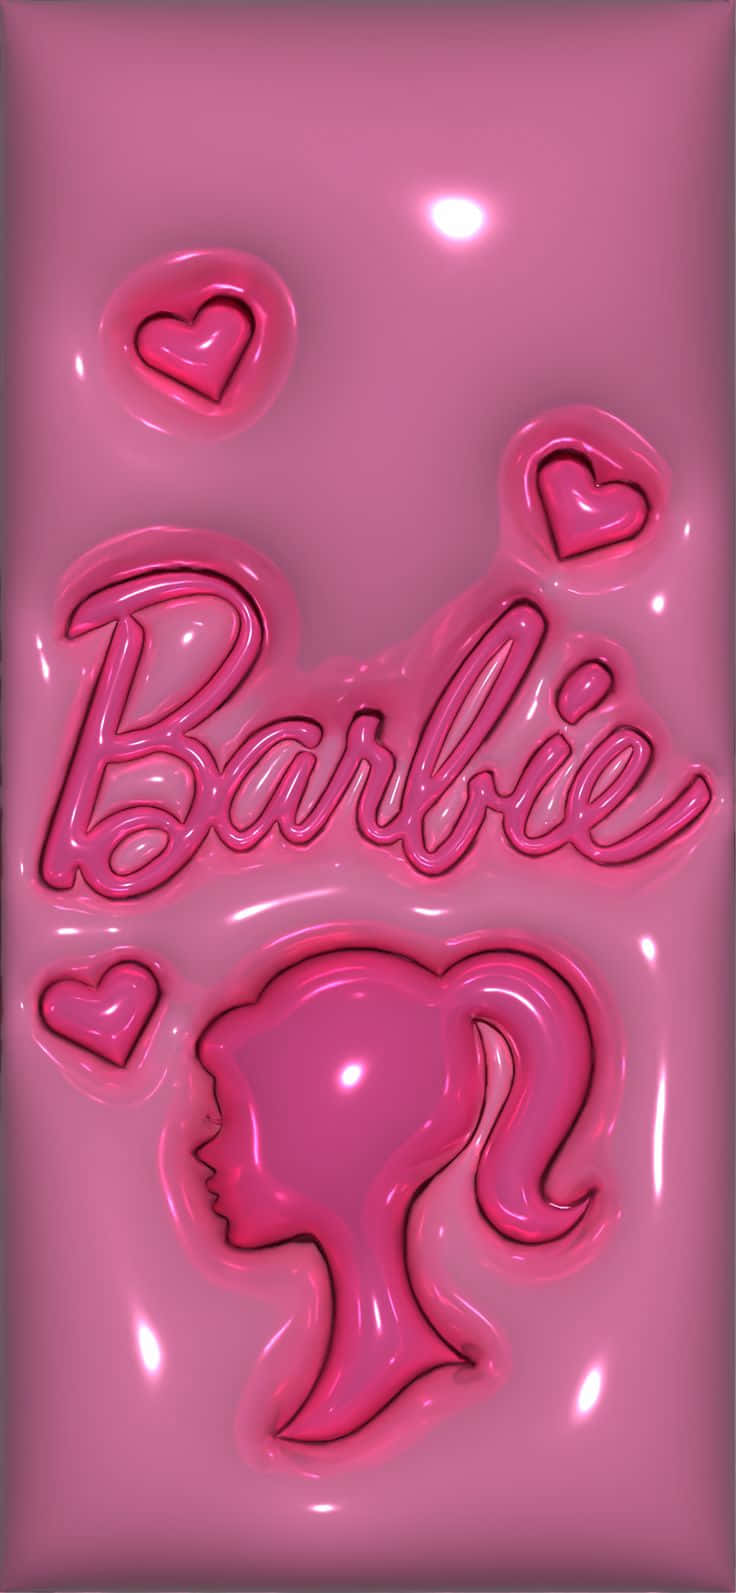 Pink Barbie Logowith Hearts Wallpaper